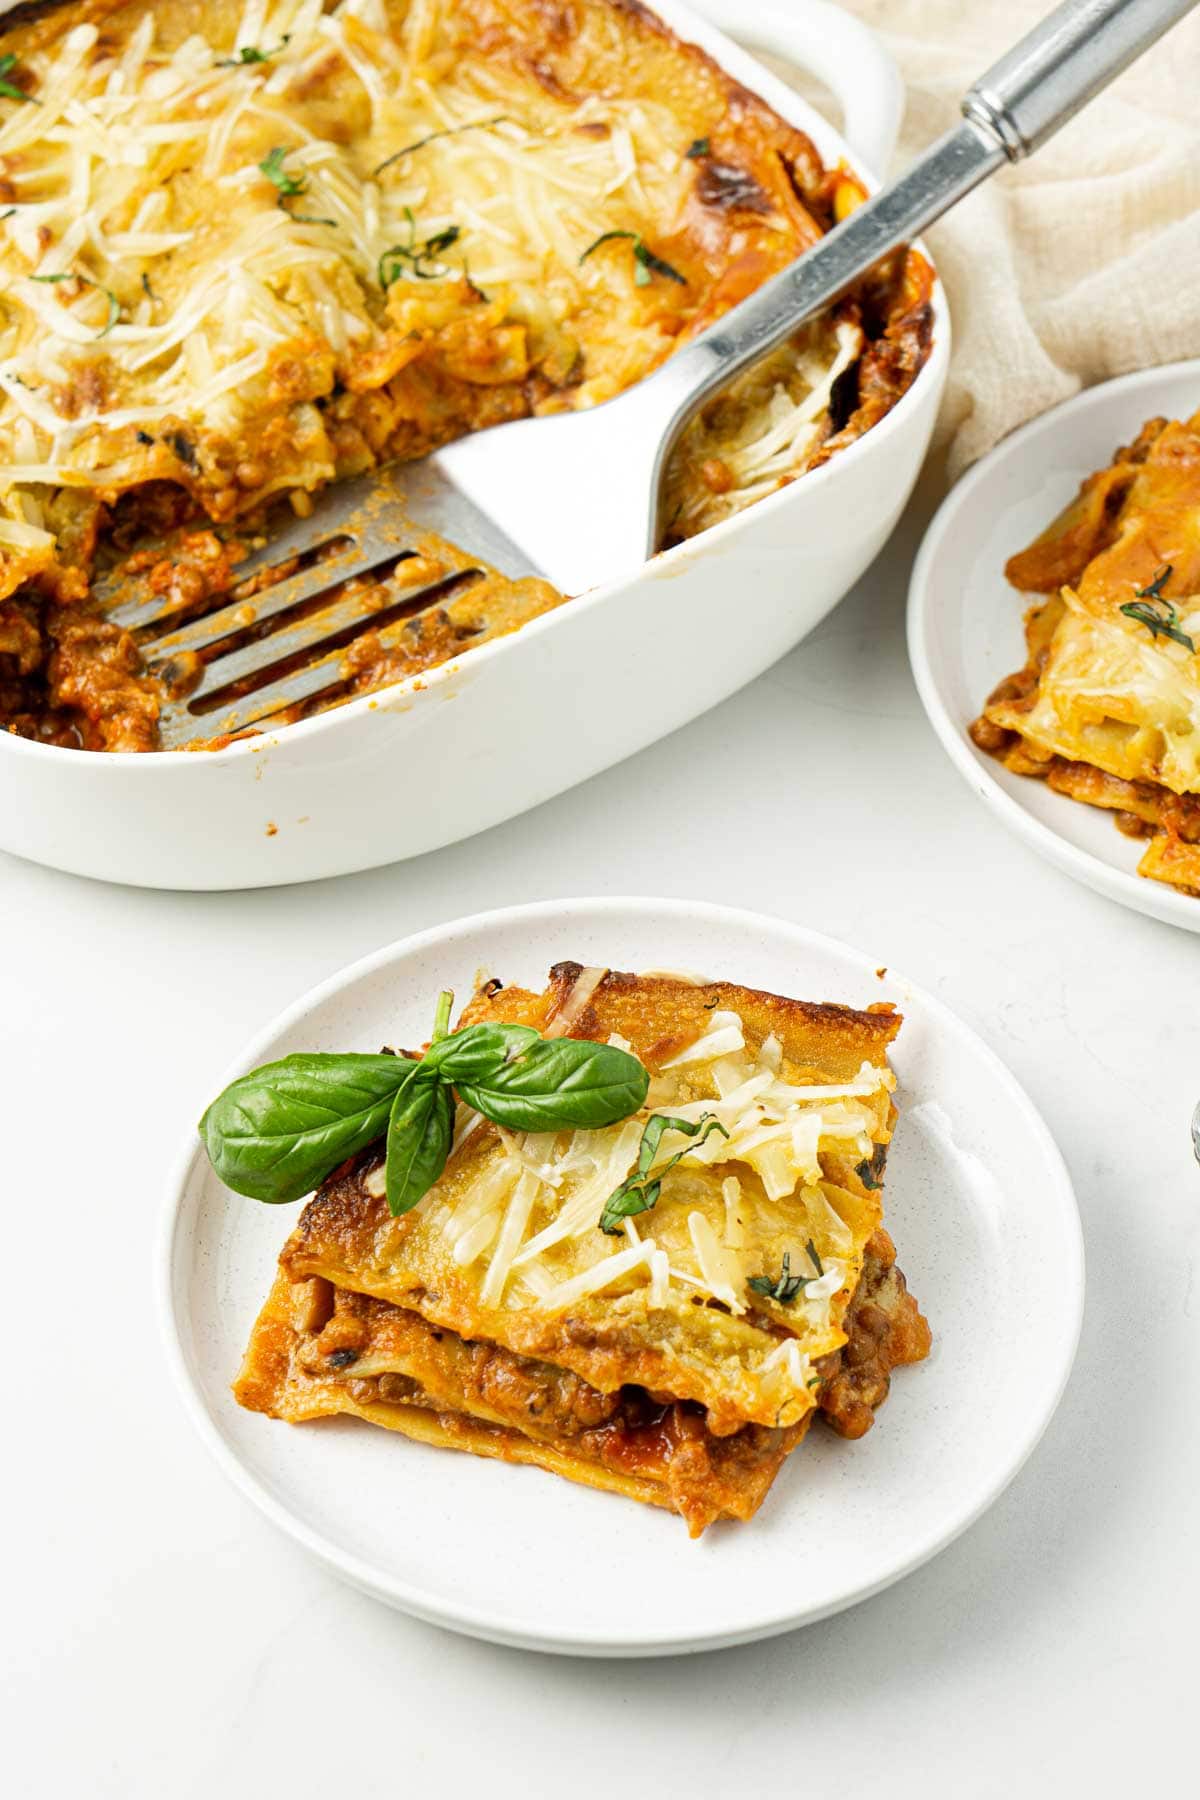 Vegan lentil lasagne cut into squares and served on white plates.